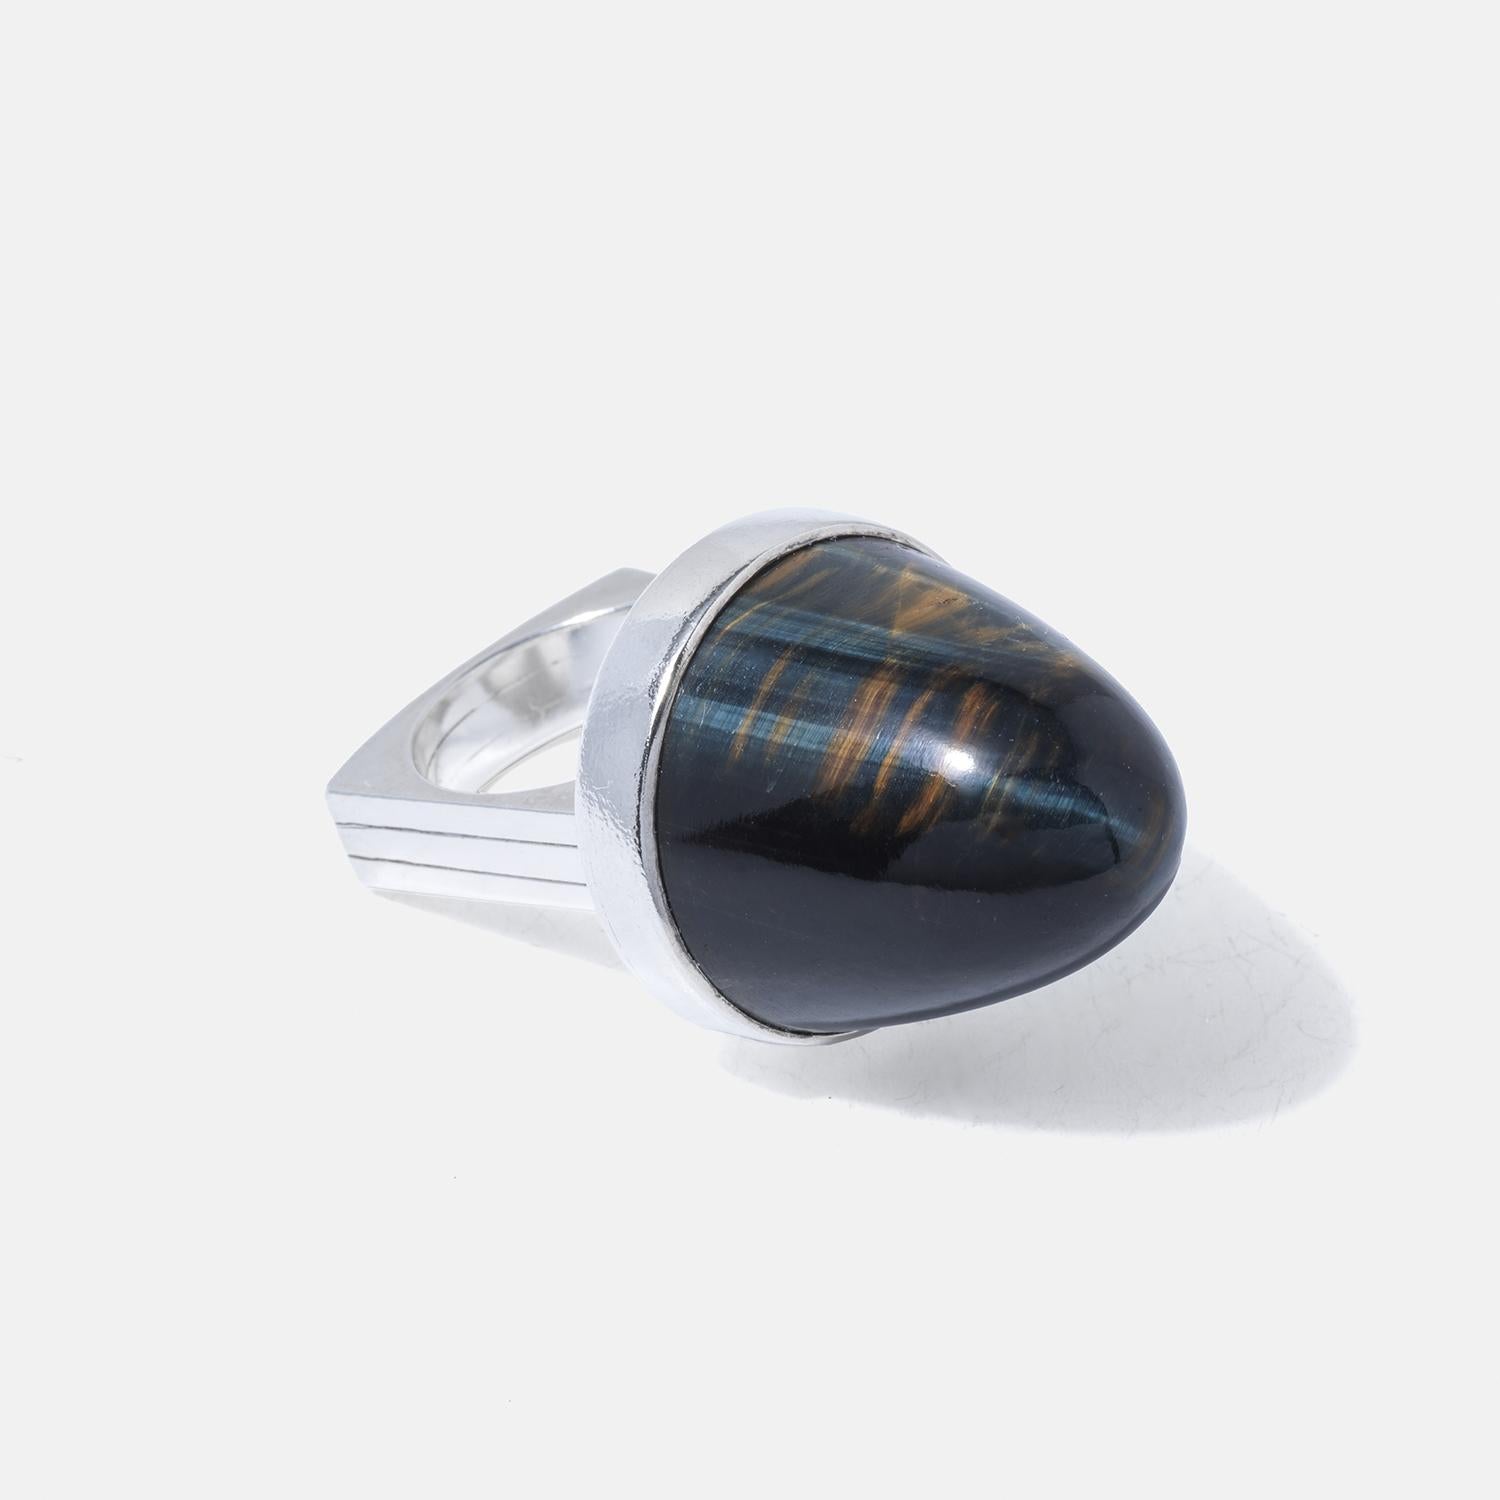 This striking ring features a cabochon-cut tiger's eye gemstone, set prominently atop a robust rectangular silver band. The stone's height accentuates its mesmerizing layers of golden and dark brown hues, which shift and shimmer with light. The